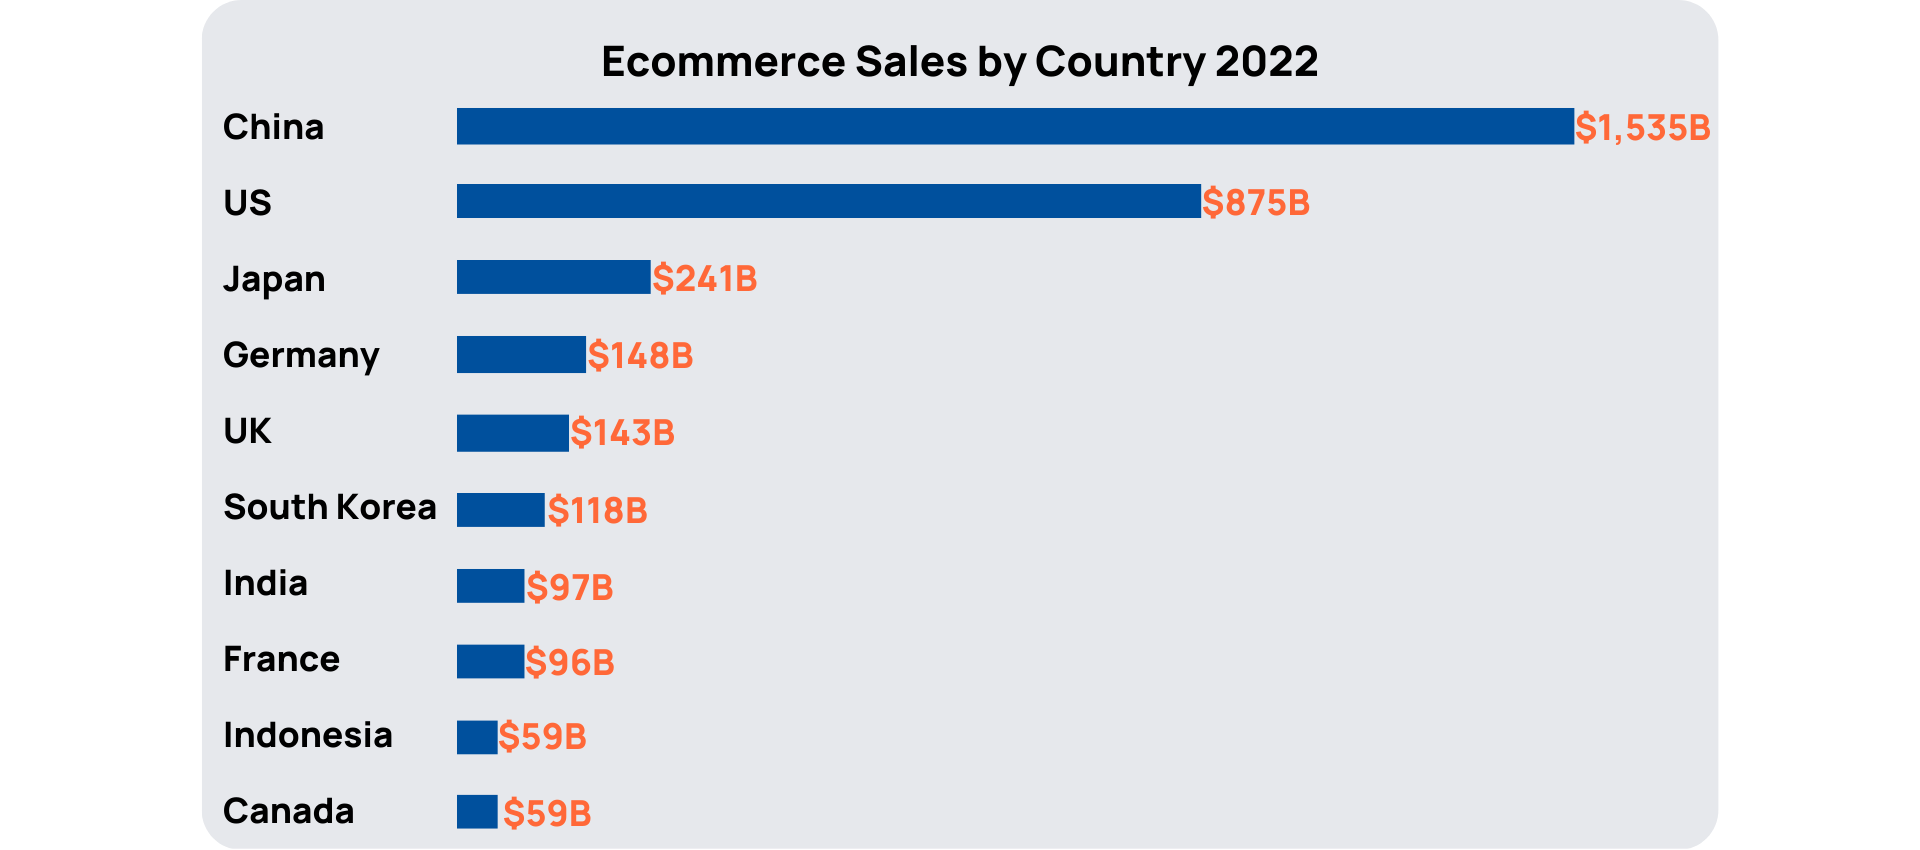 Ecommerce sales by country 2022